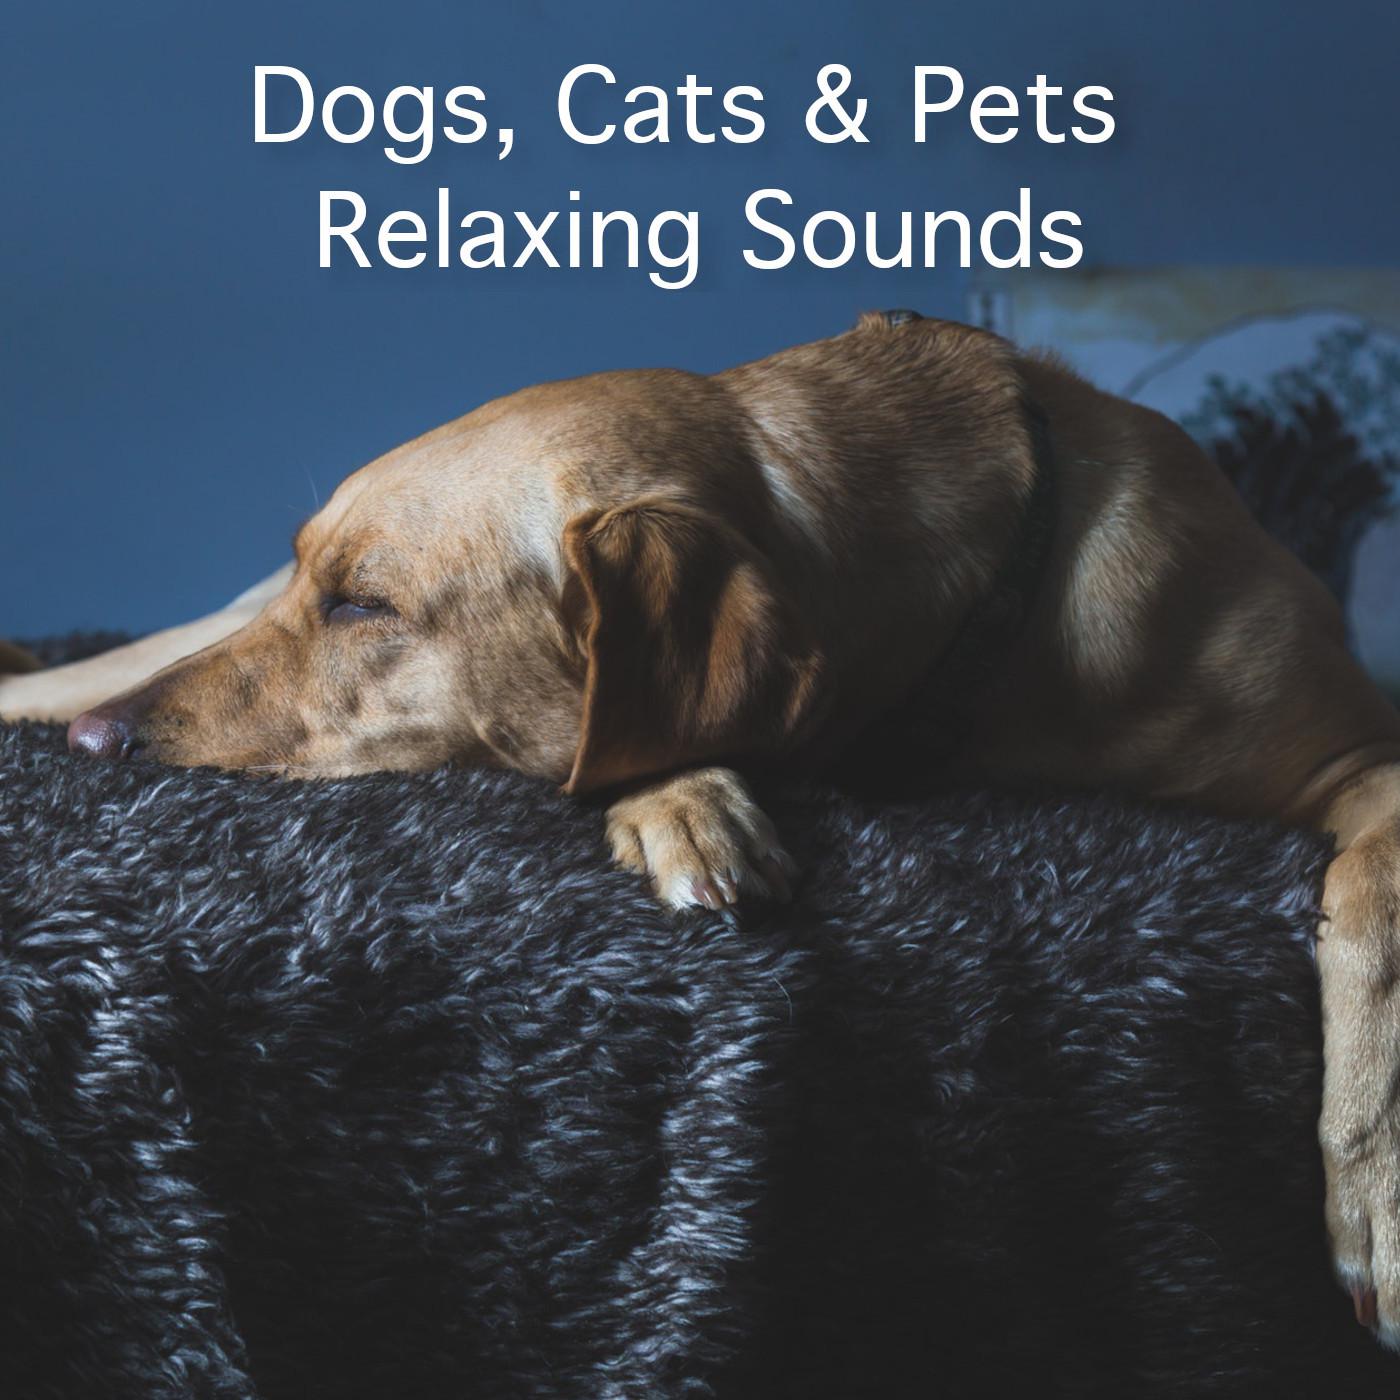 Dogs, Cats & Pets Relaxing Sounds